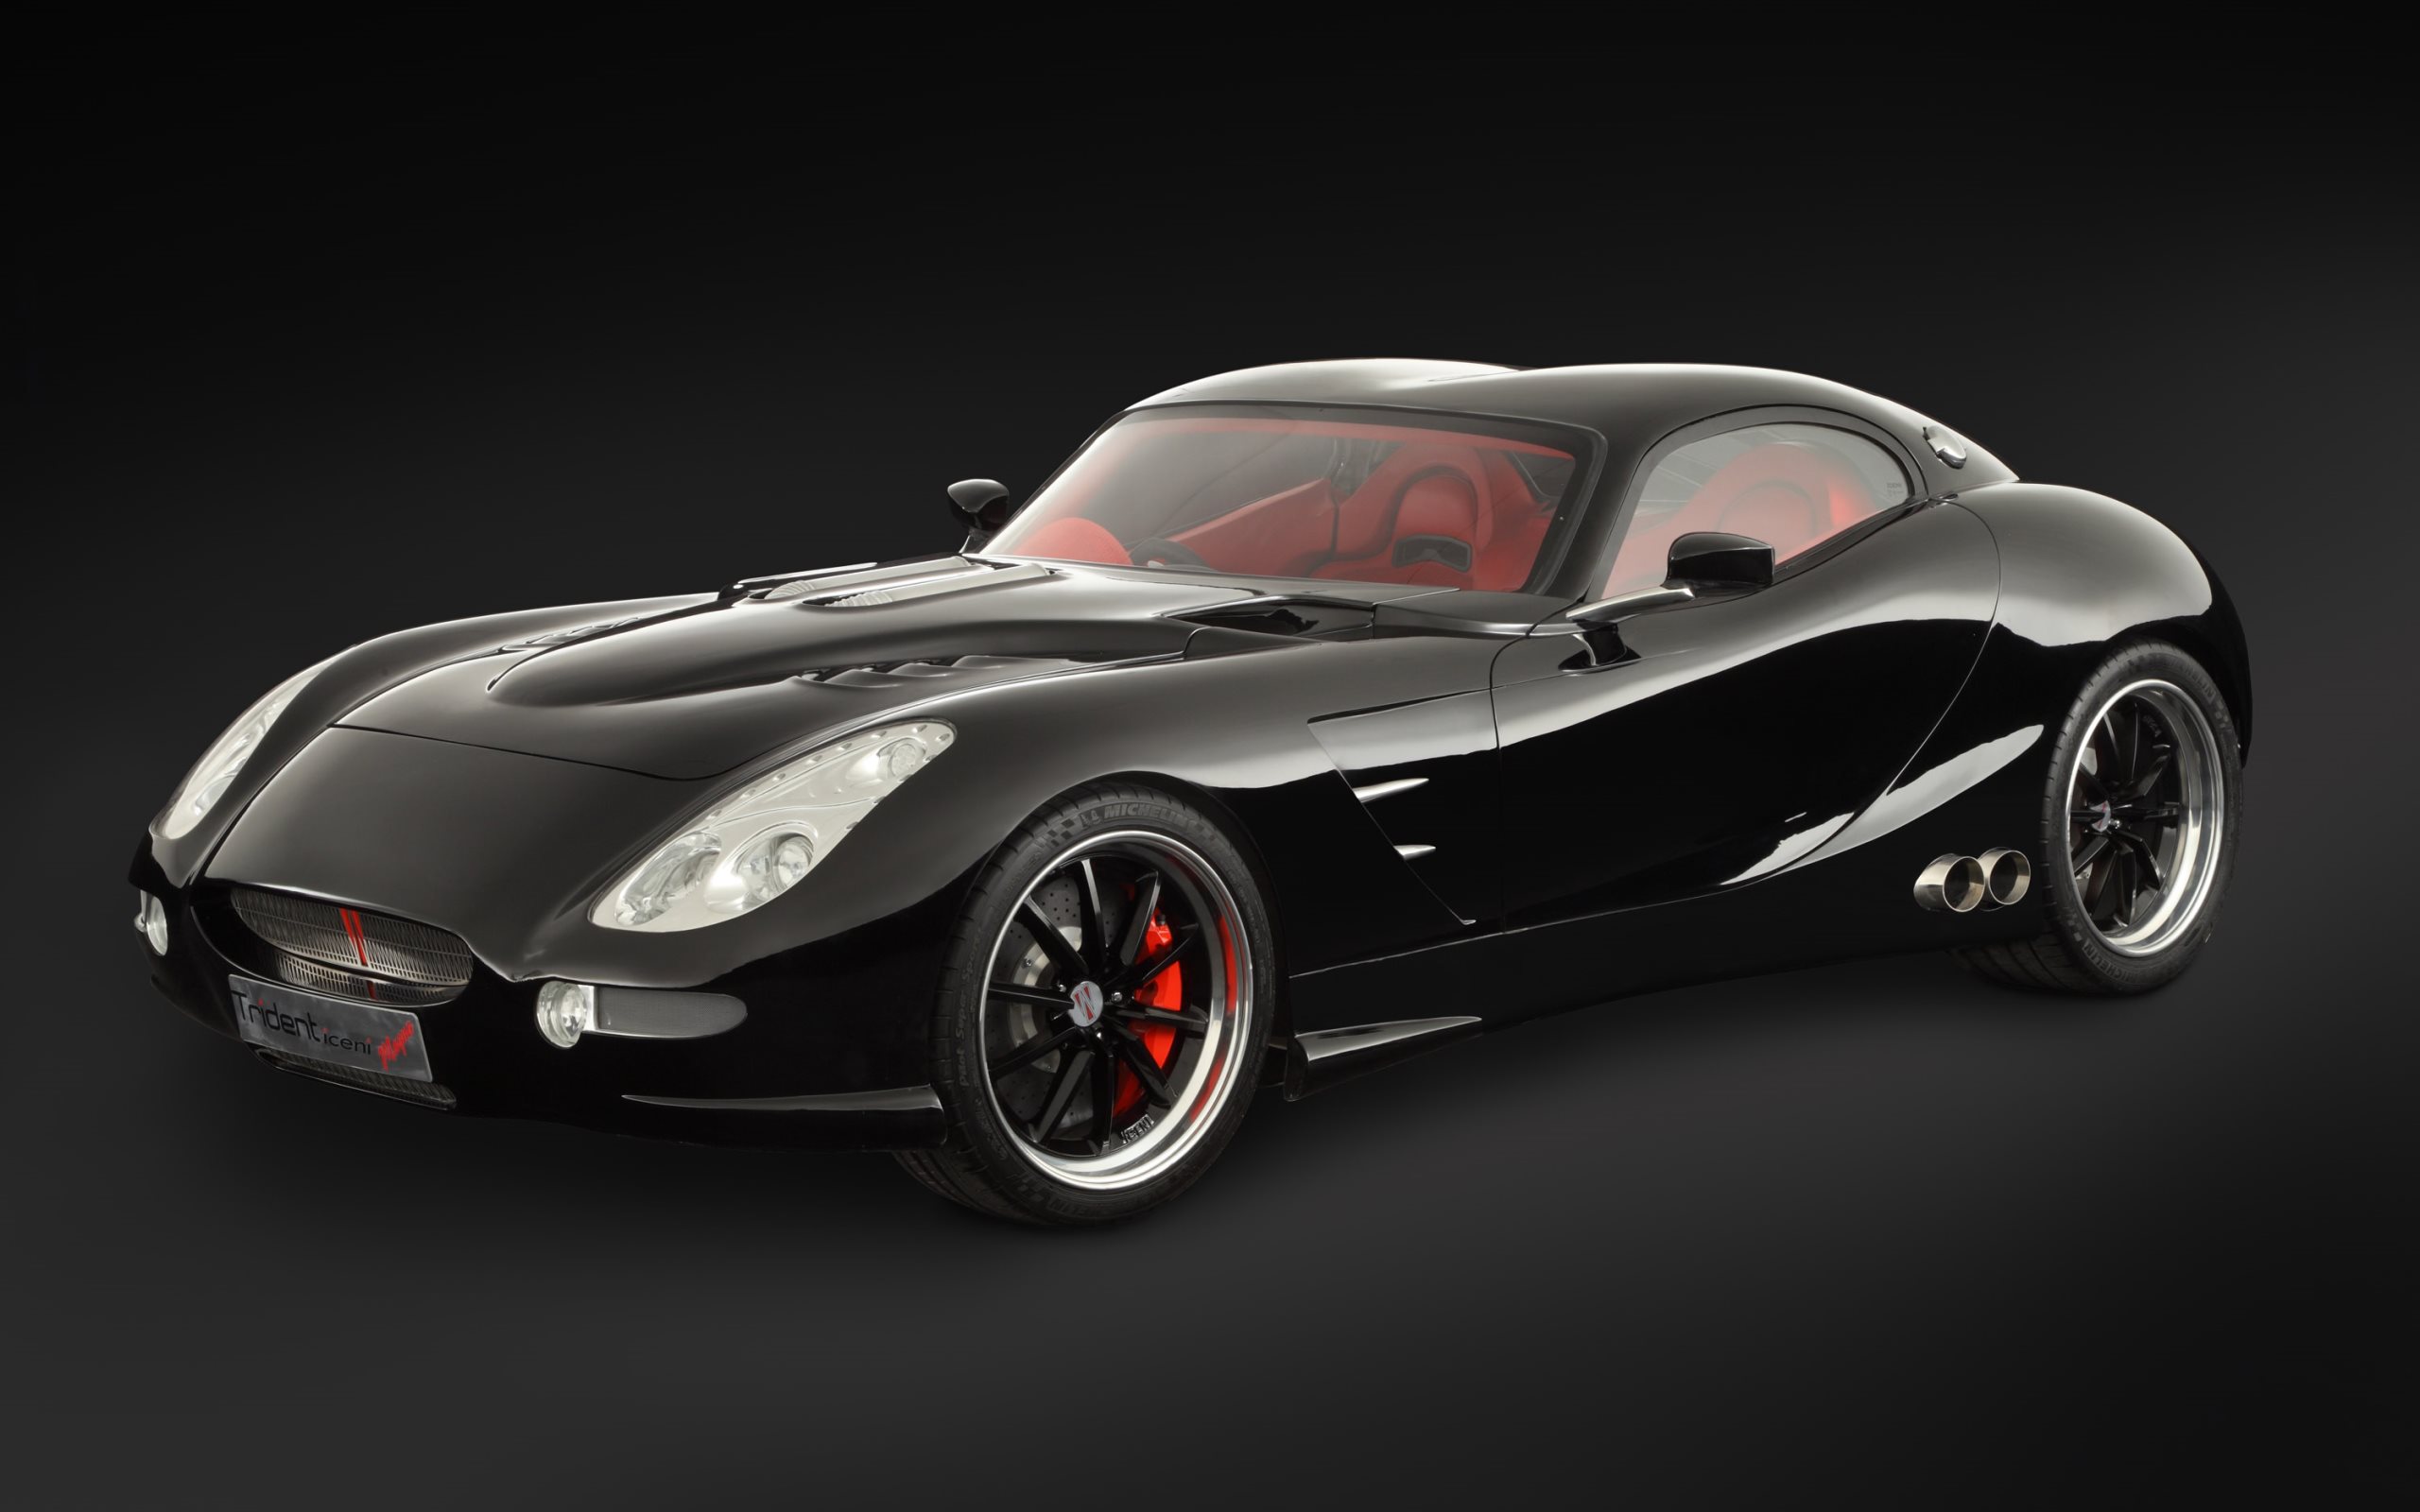 2015 trident iceni convertible wallpapers - 2015 Trident Iceni Convertible Free Wallpapers